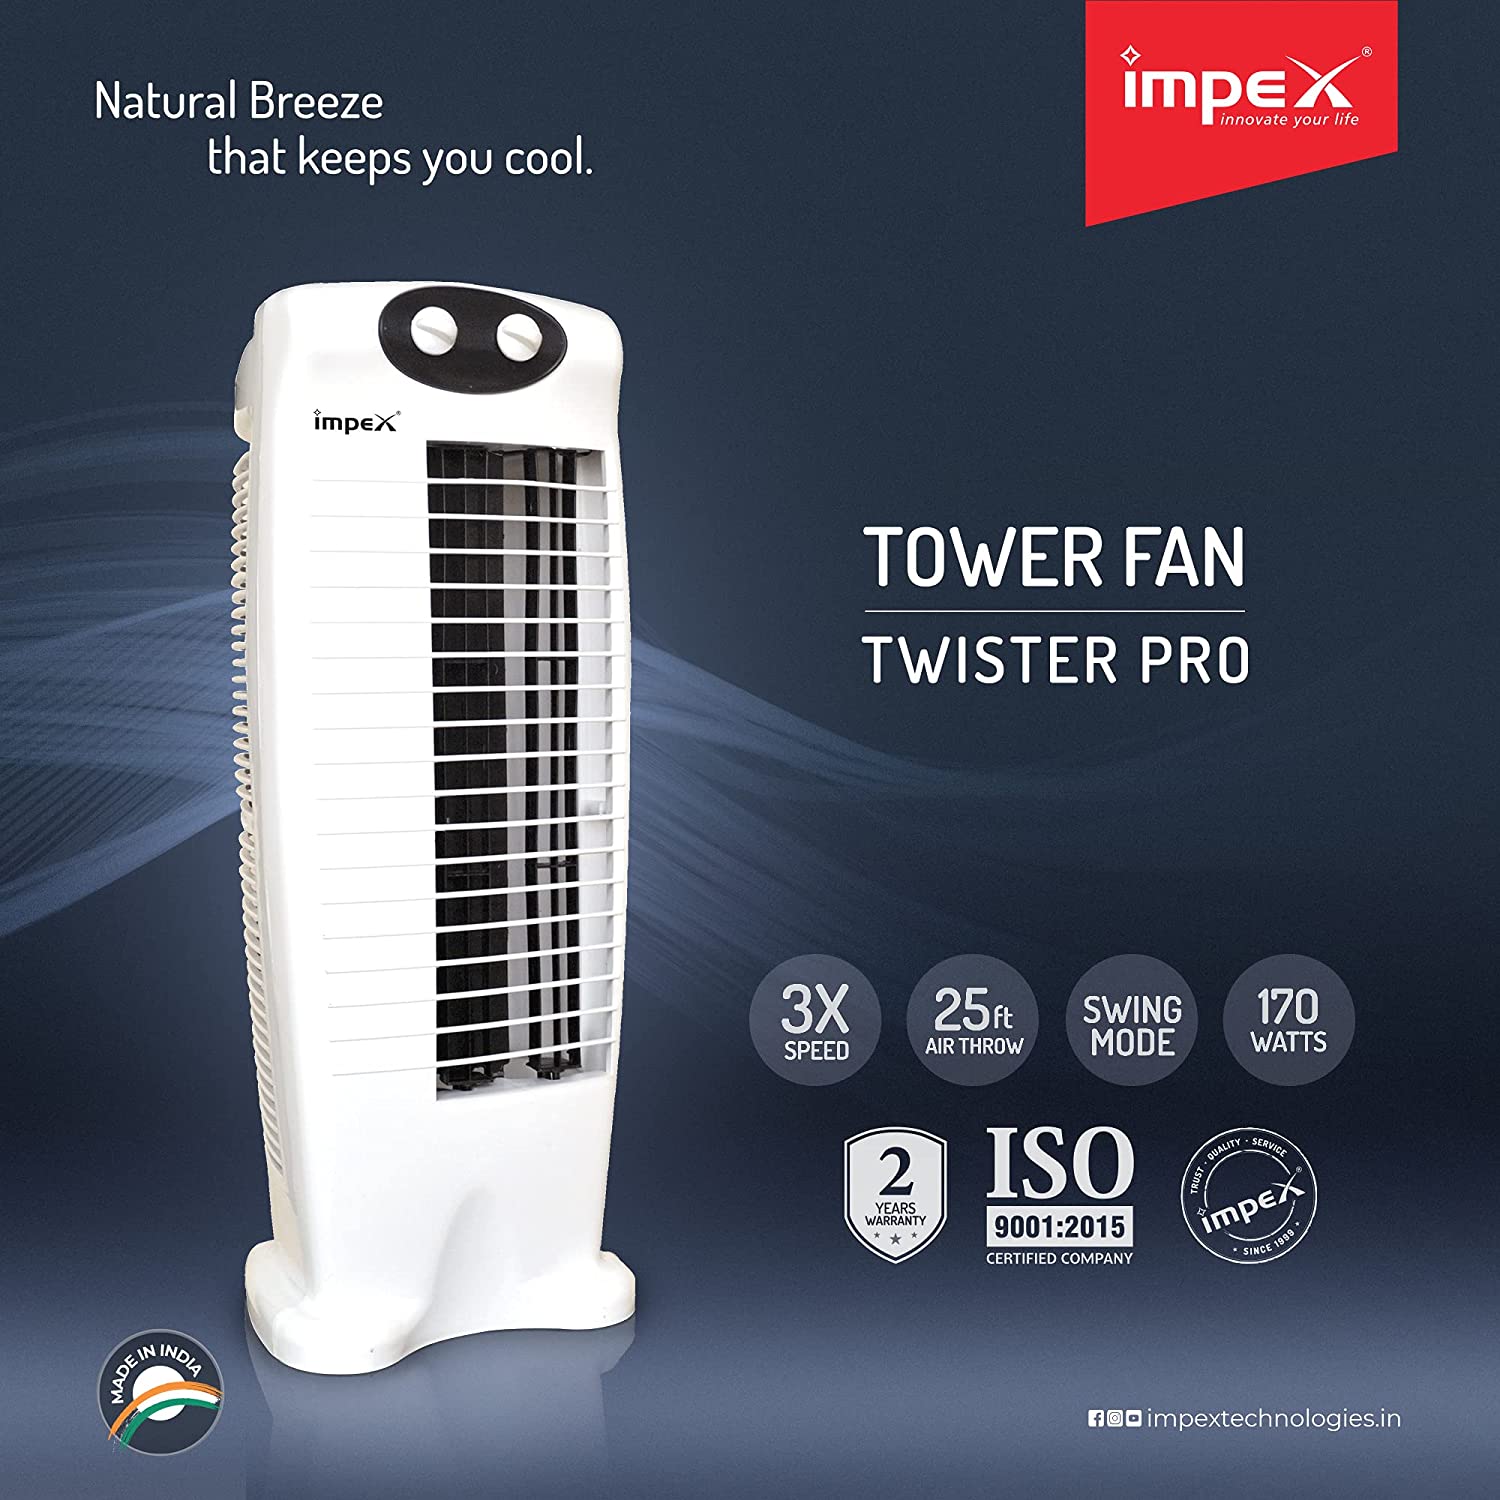 Impex TWISTER PRO 170W 1200 RPM Tower Fan with 2 Speed Control Swing Mode 2 years Warranty, White